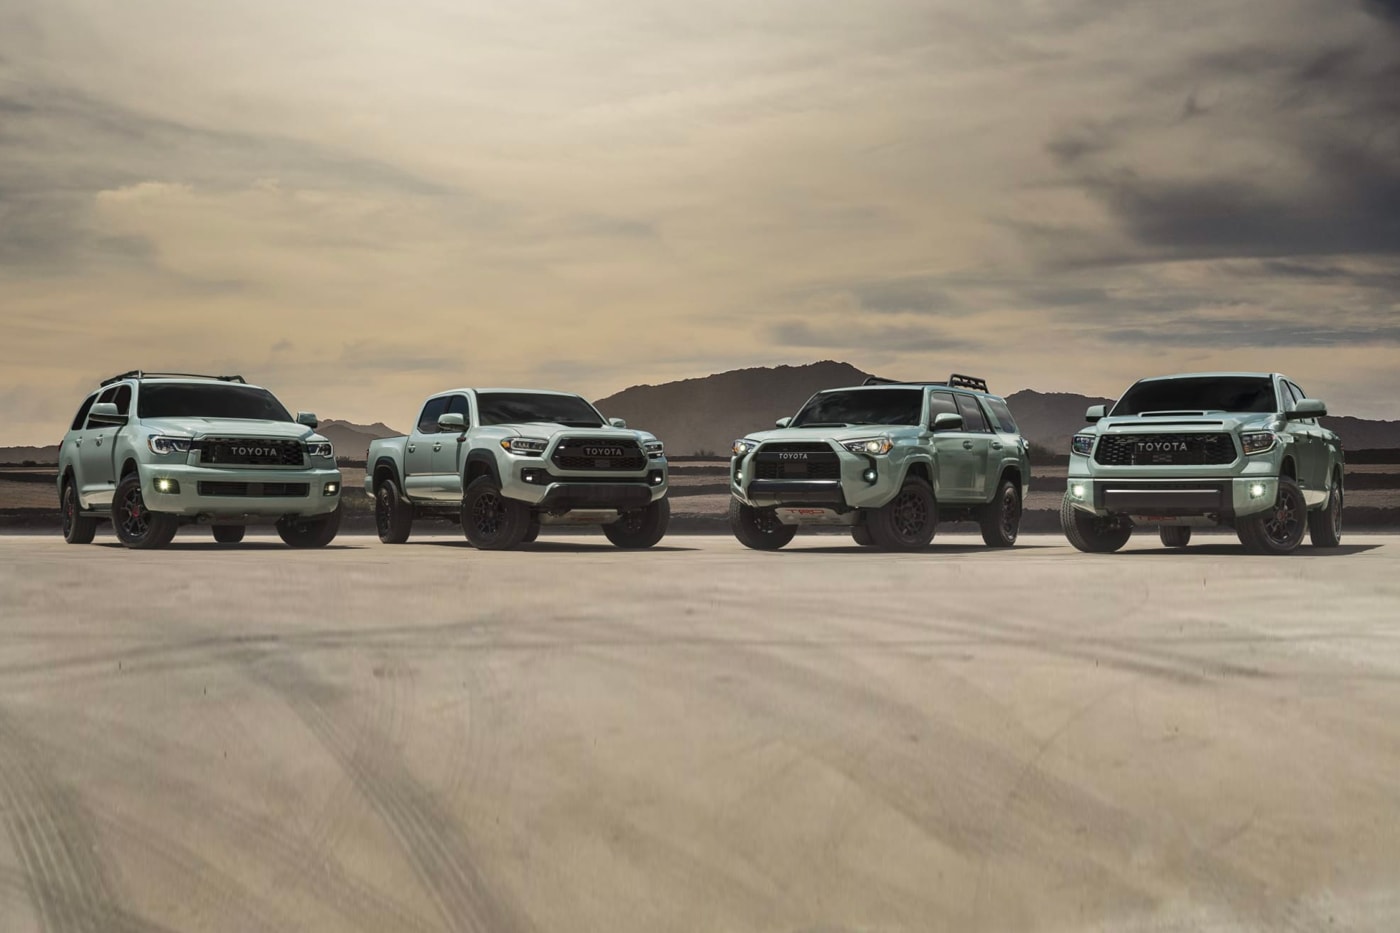 Toyota Unveils Its "Lunar Rock" TRD Pro Exclusive Color Option 4Runner Tacoma Tundra Sequoia suvs off-road 